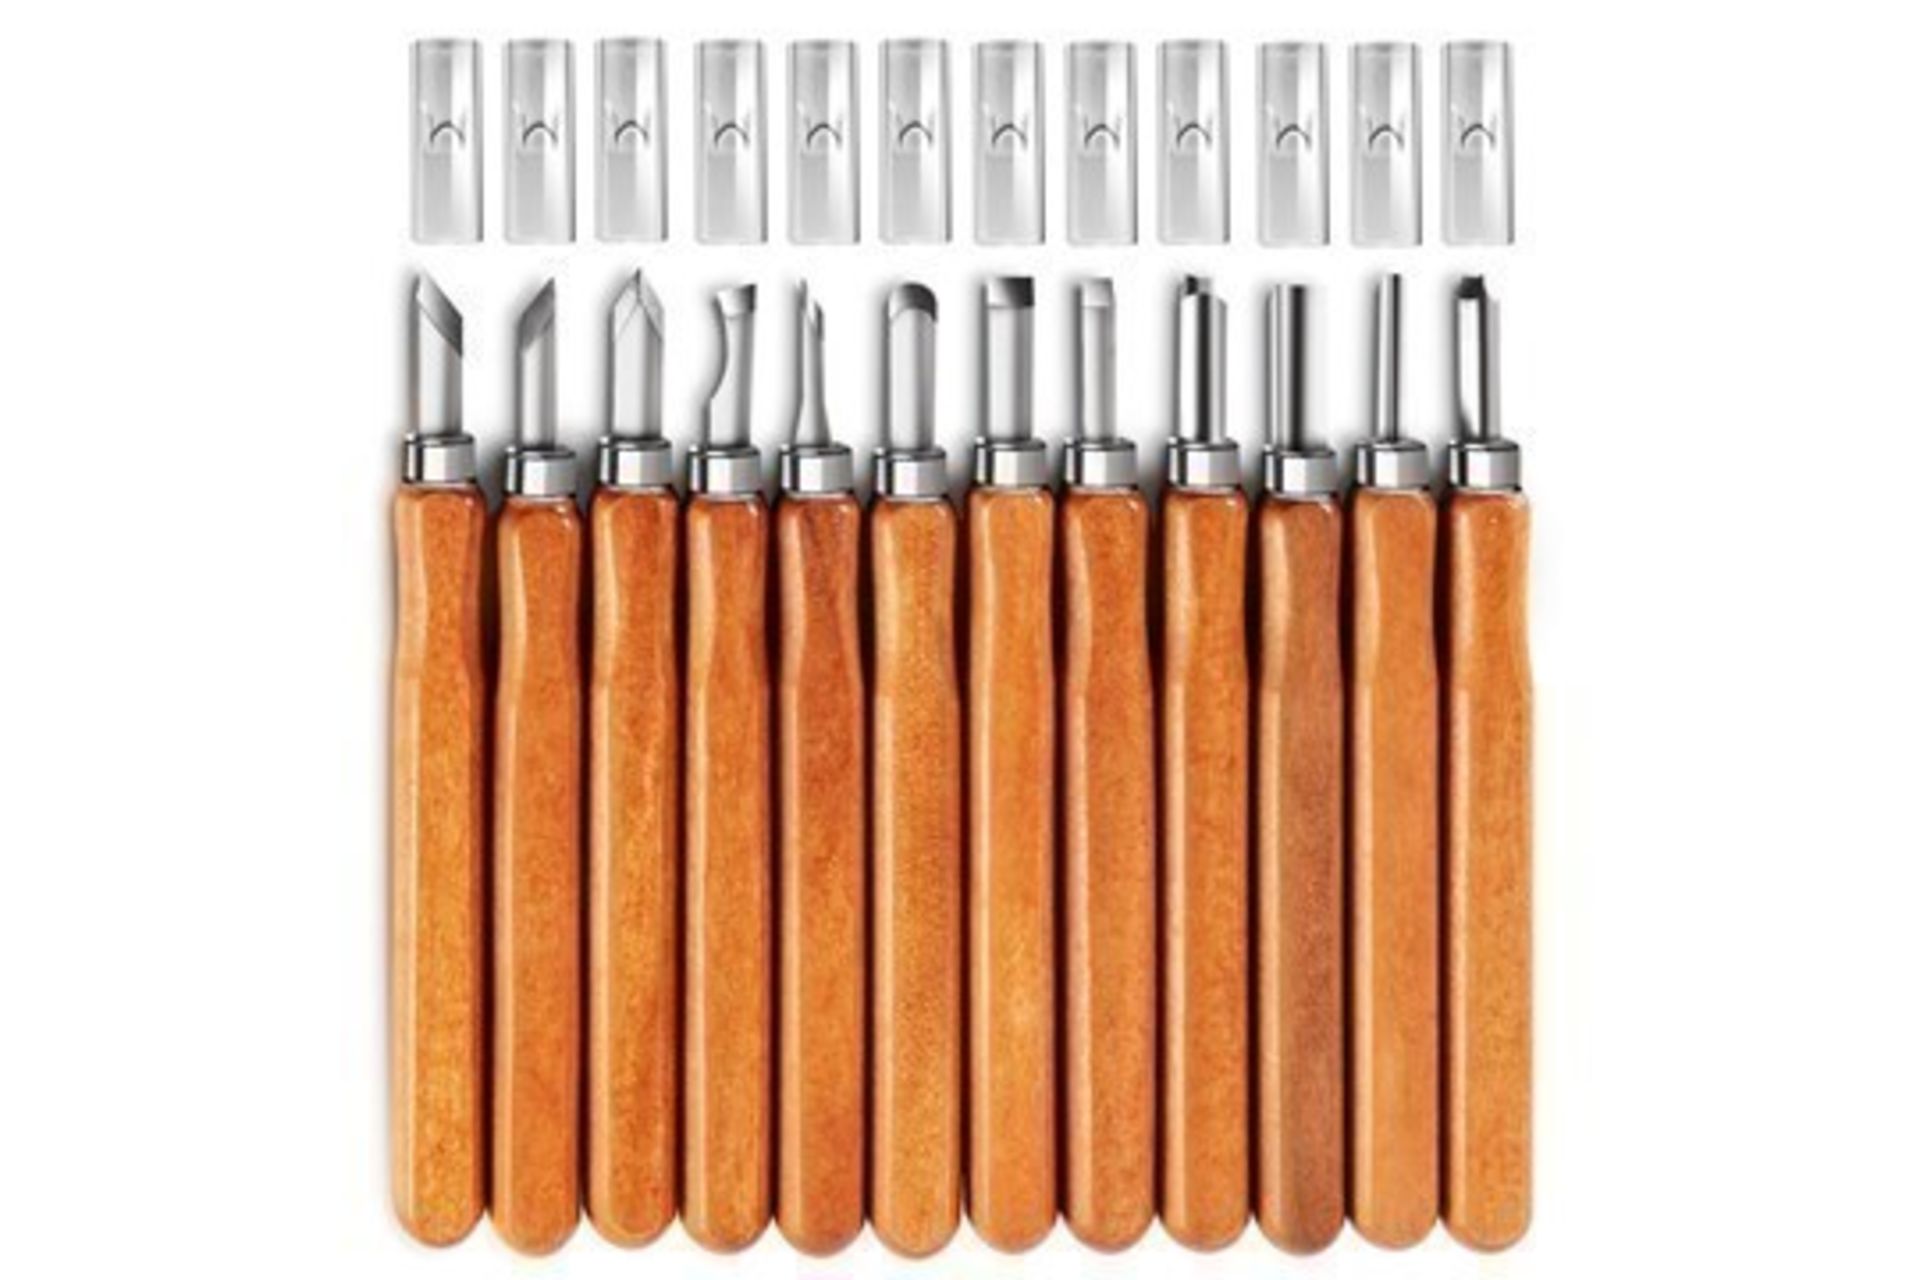 Lot to Contain 10 Brand New 12 Piece Woodwork Knife Sets